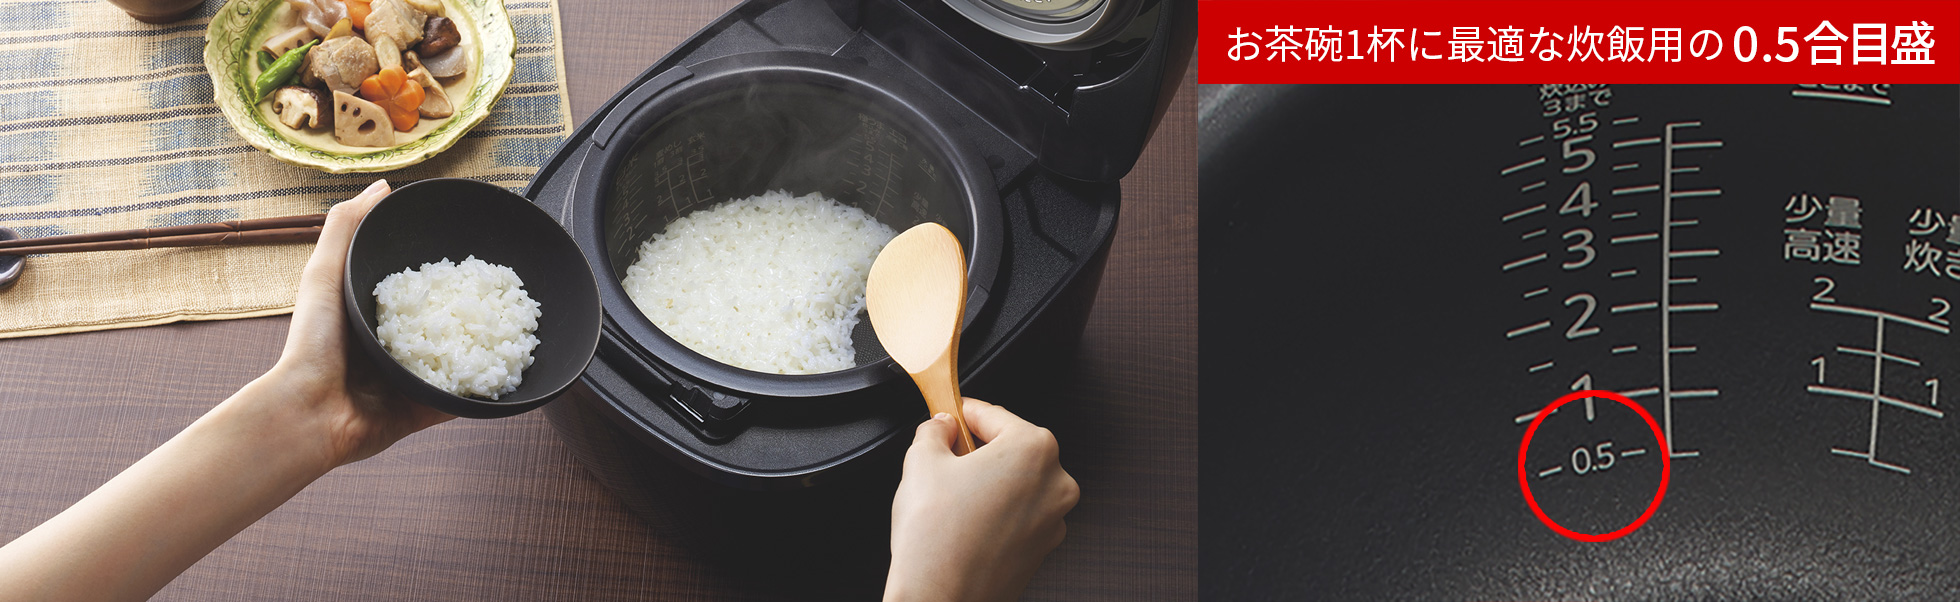 0.5 go mark ideal for cooking a bowl of rice